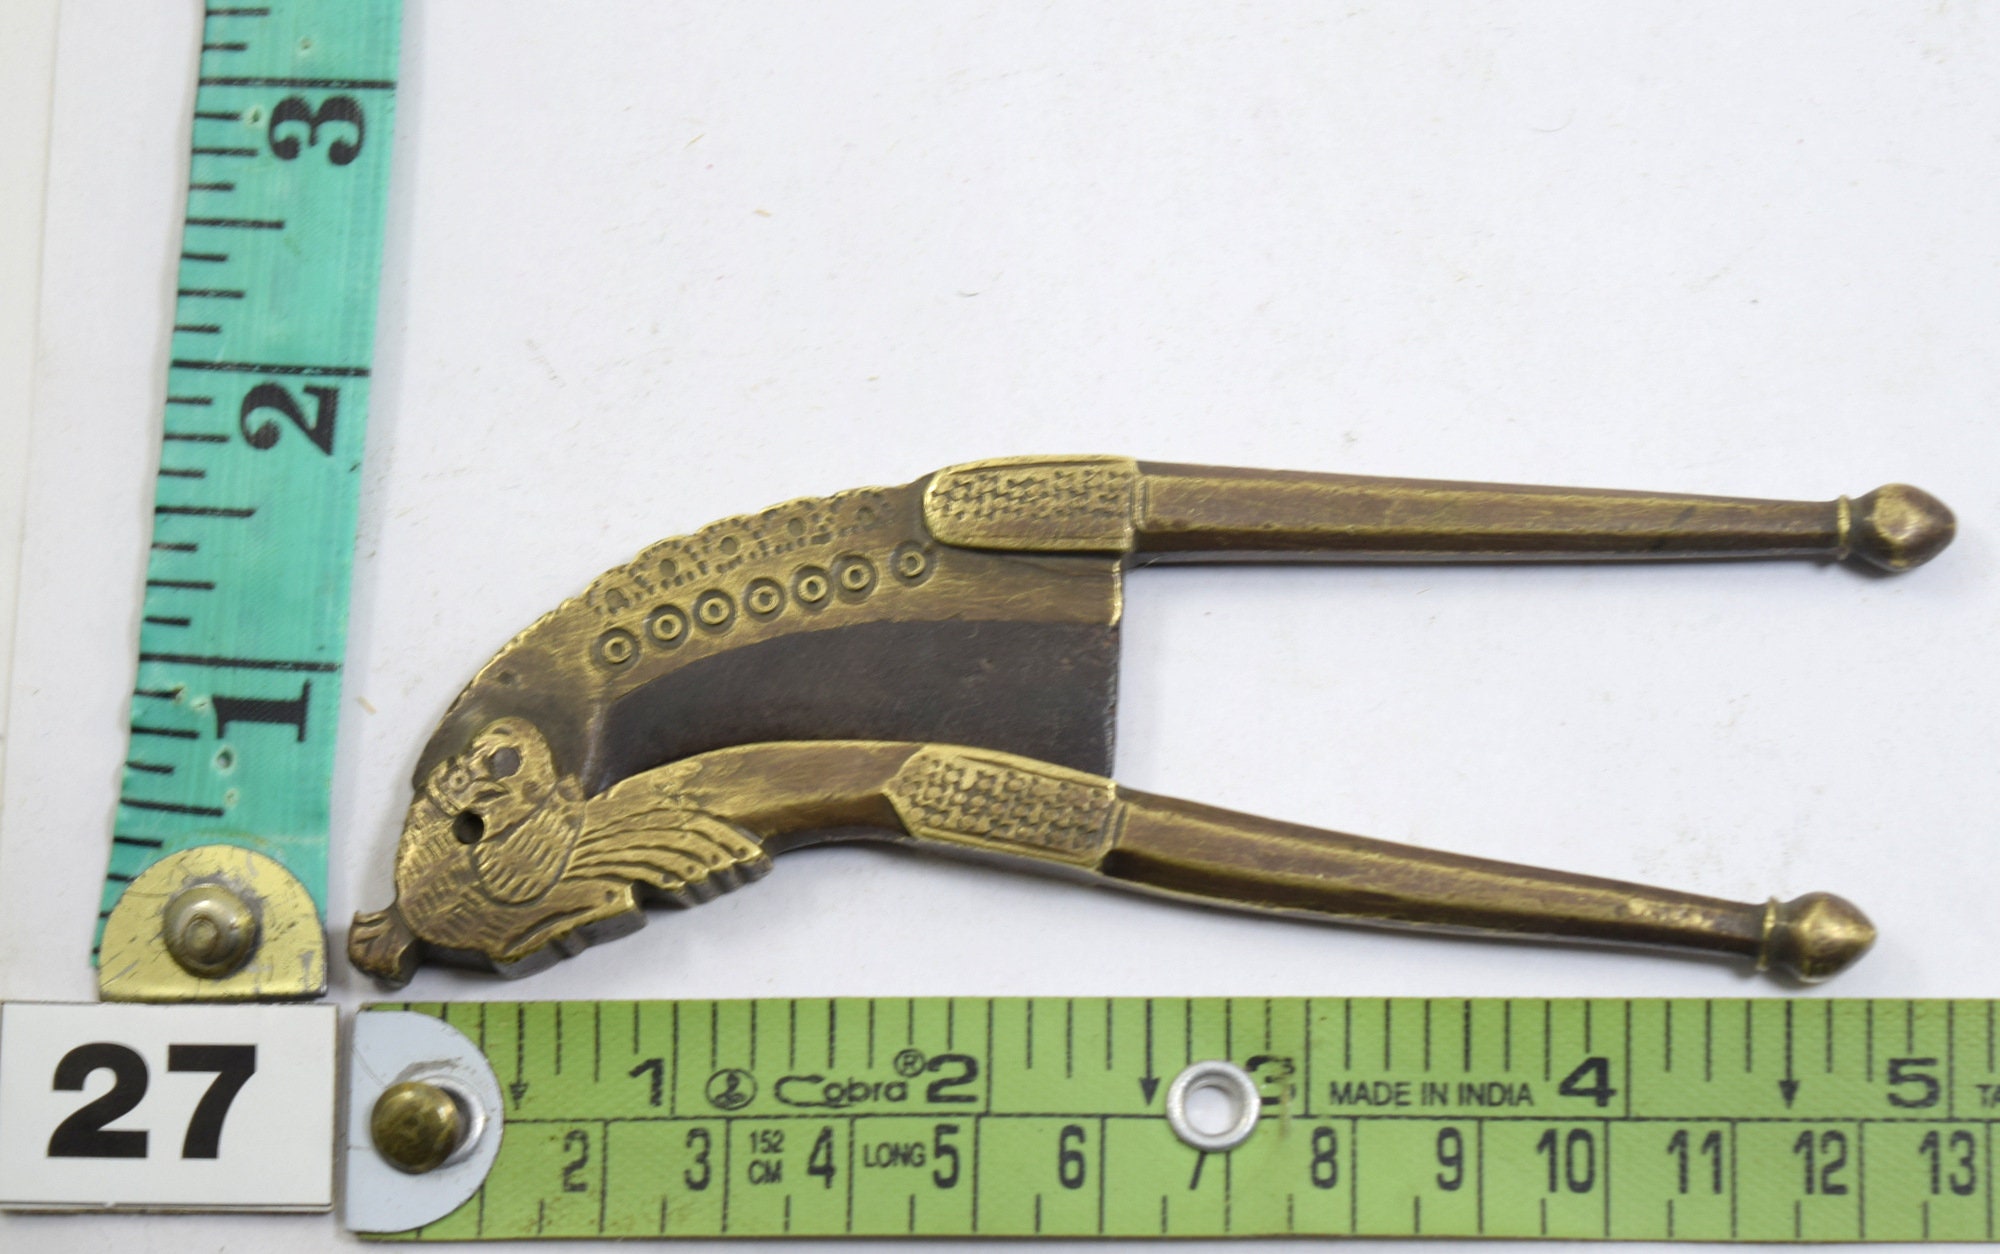 Vintage Indian Collectible Brass Betel Nut Cutter Old Designed Tool  Decorative Indian Brass Areca Nut Cutter Wedding Gift. I12-149 